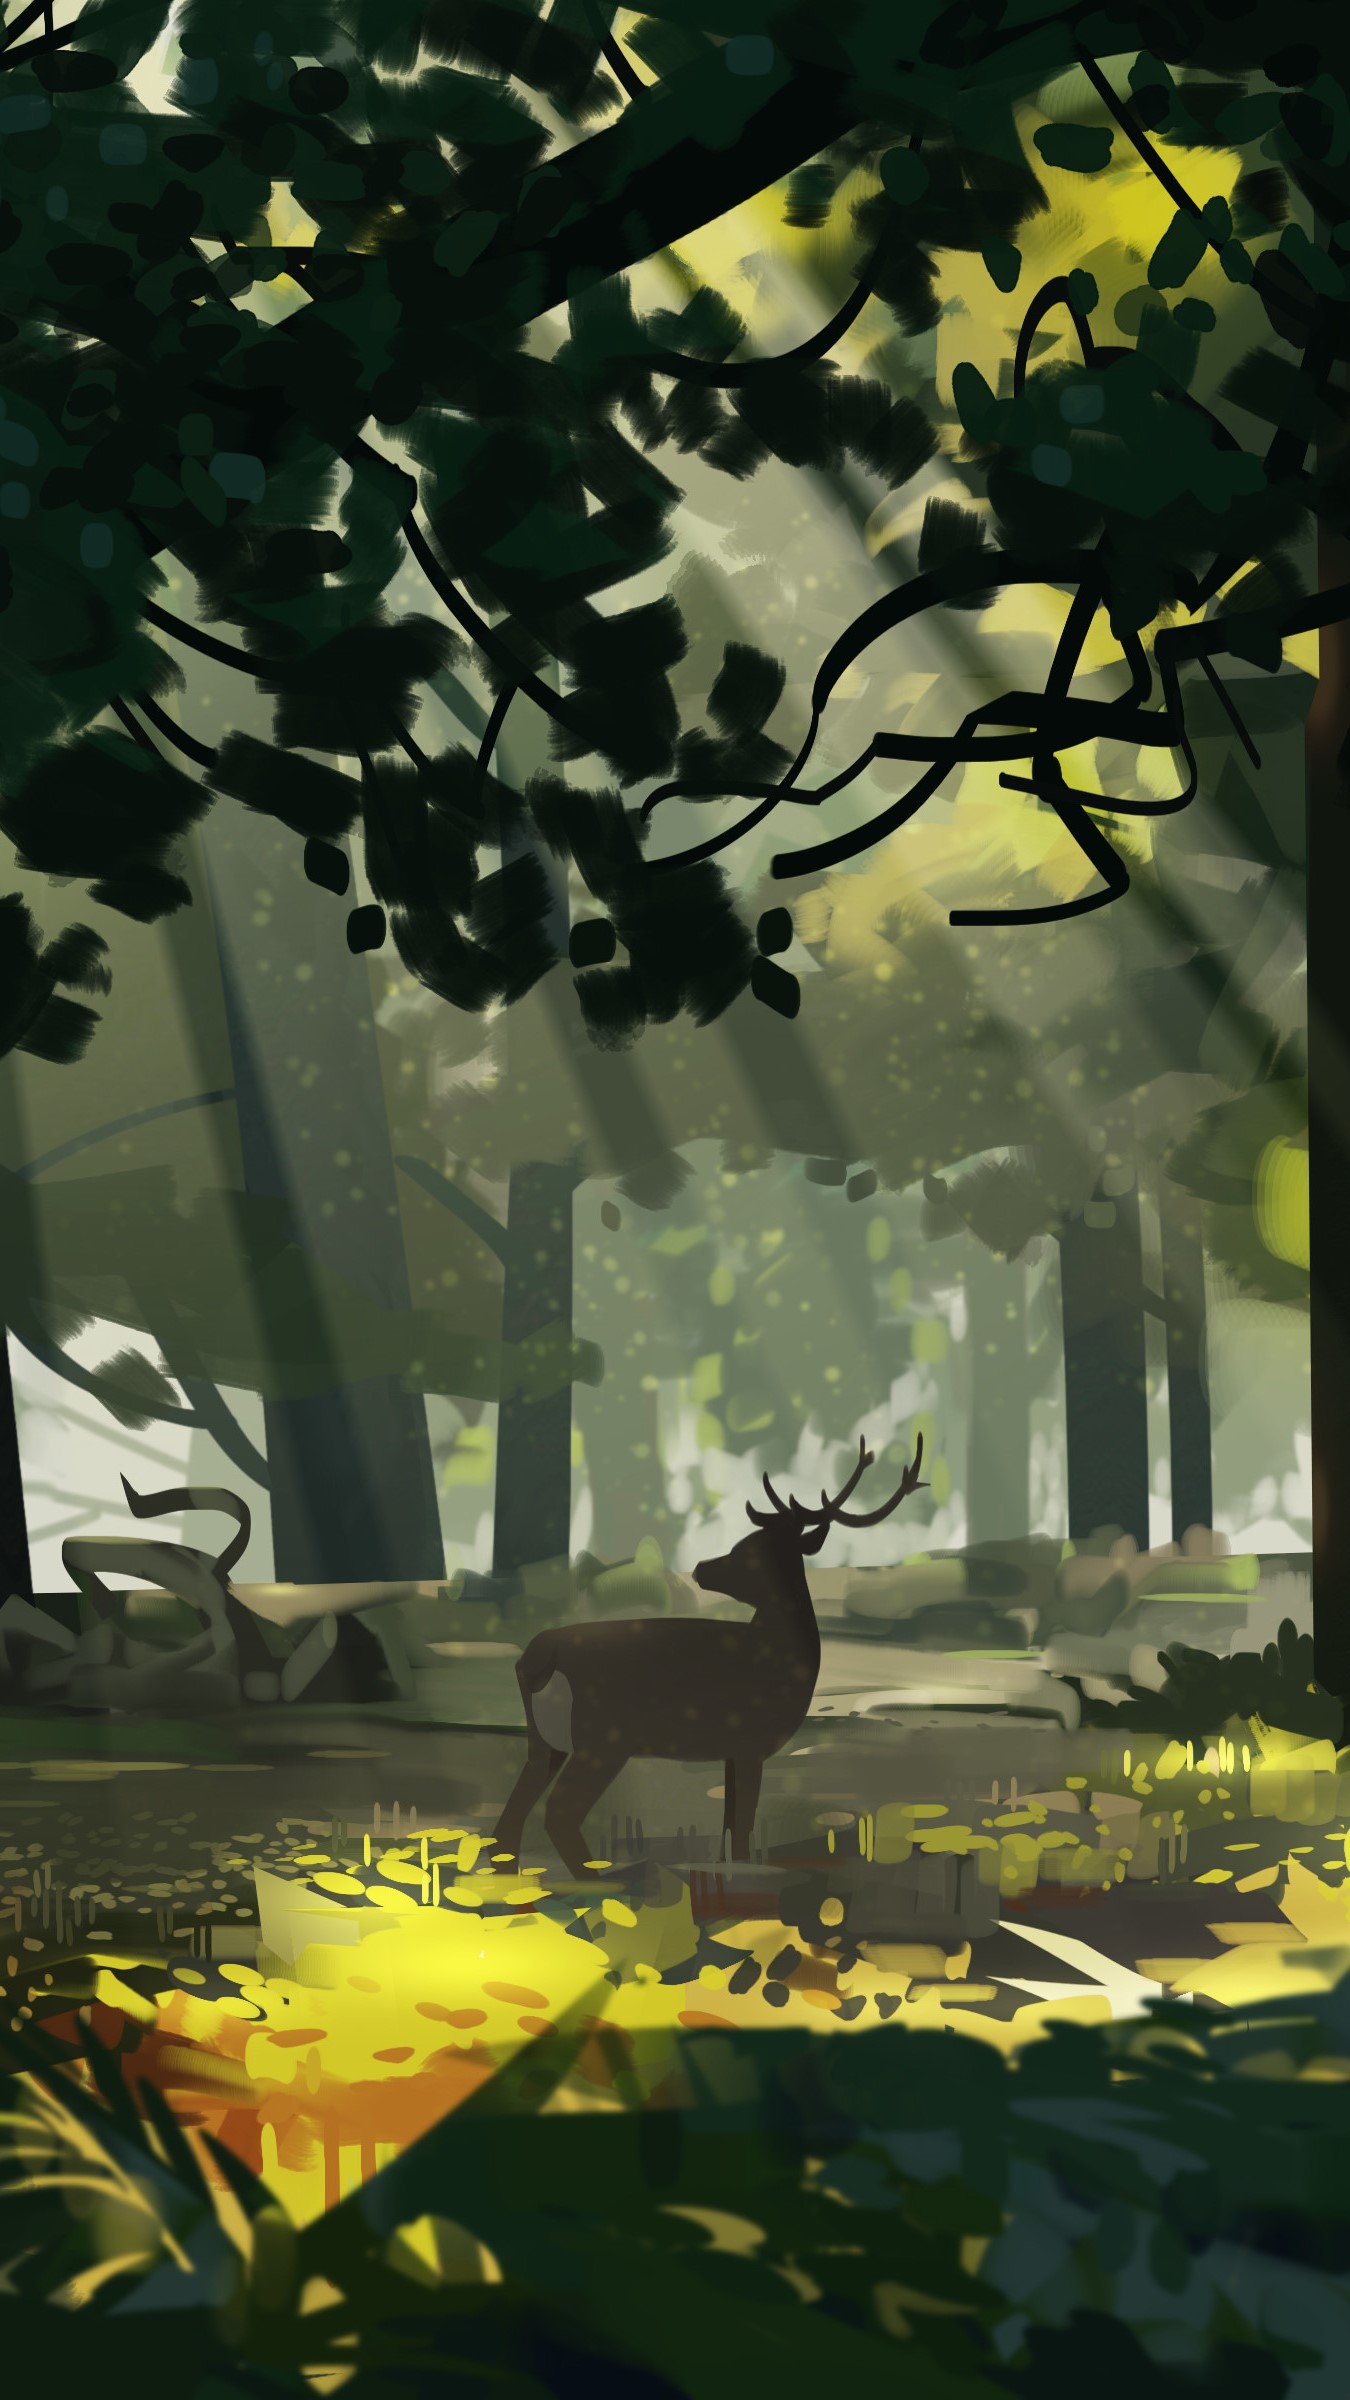 A tranquil deer standing in a sunlit forest clearing - phone wallpaper.